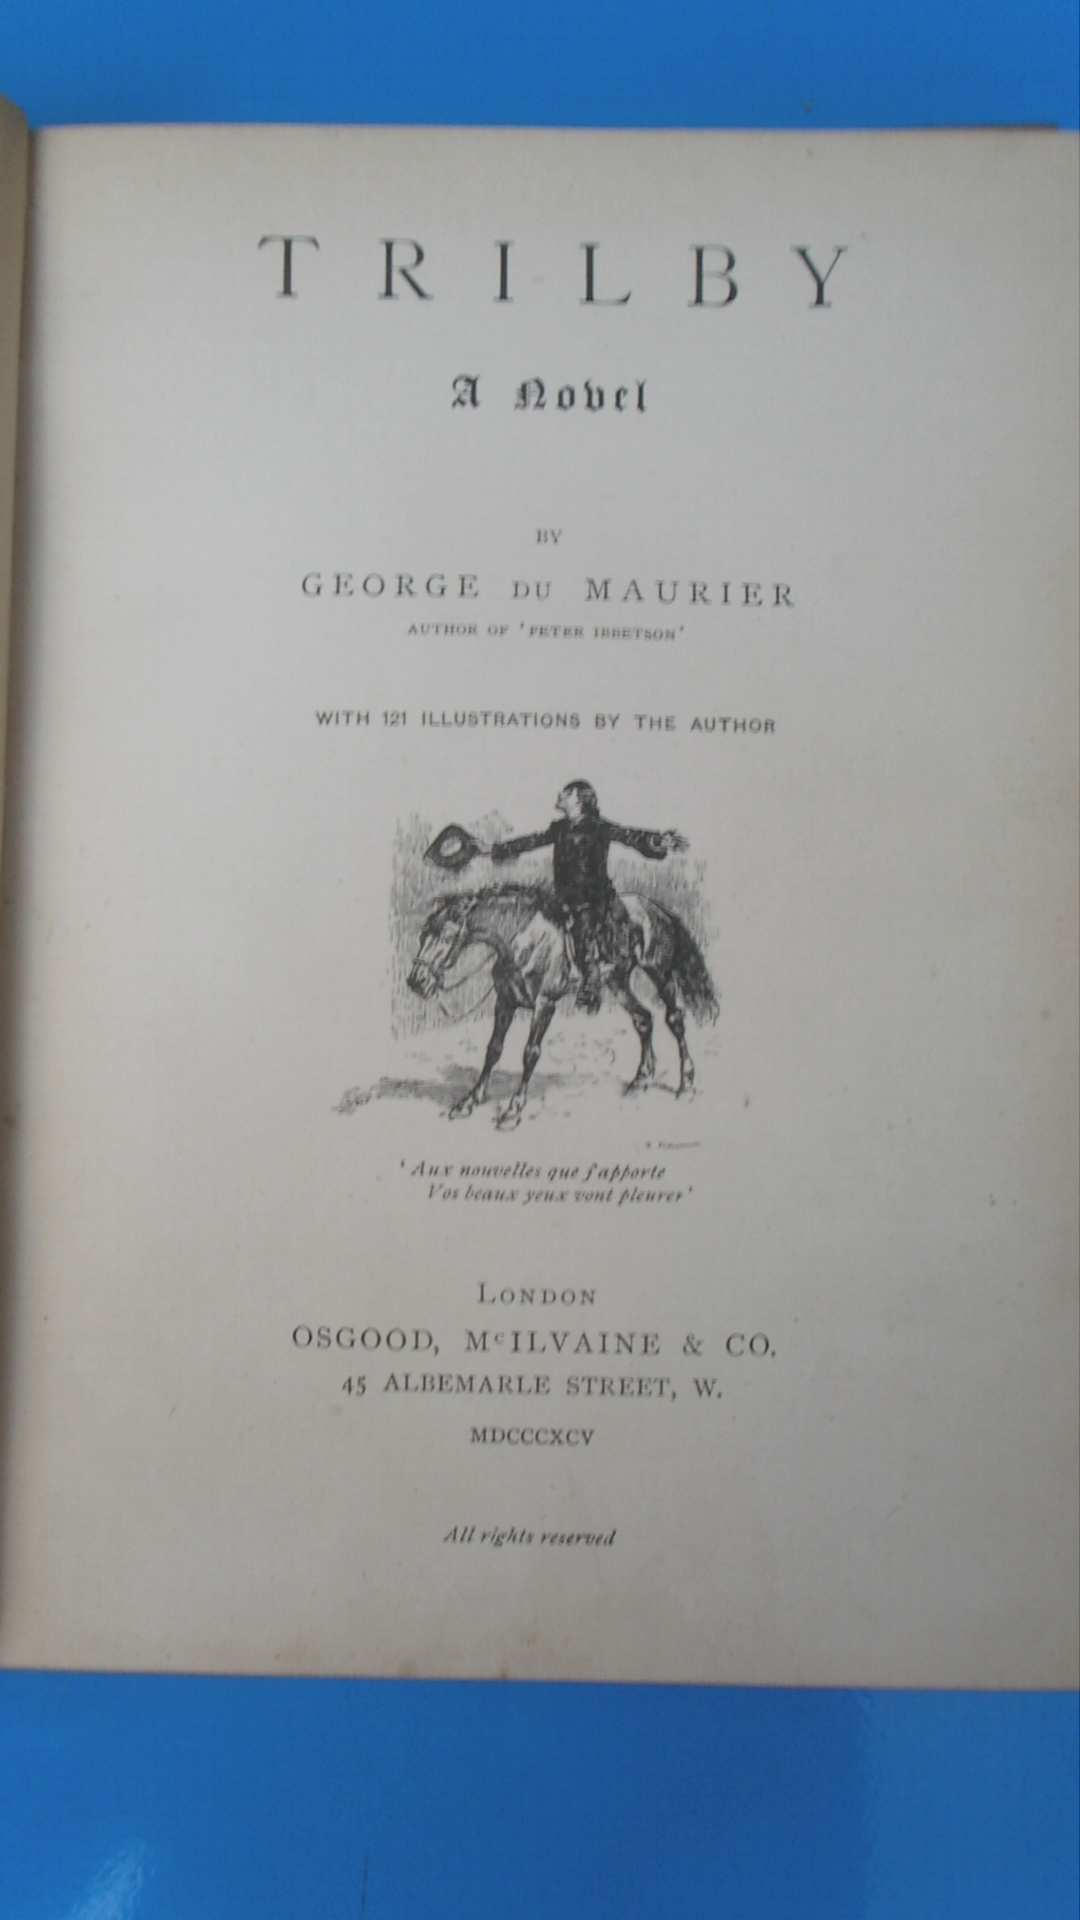 trilby by george du maurier